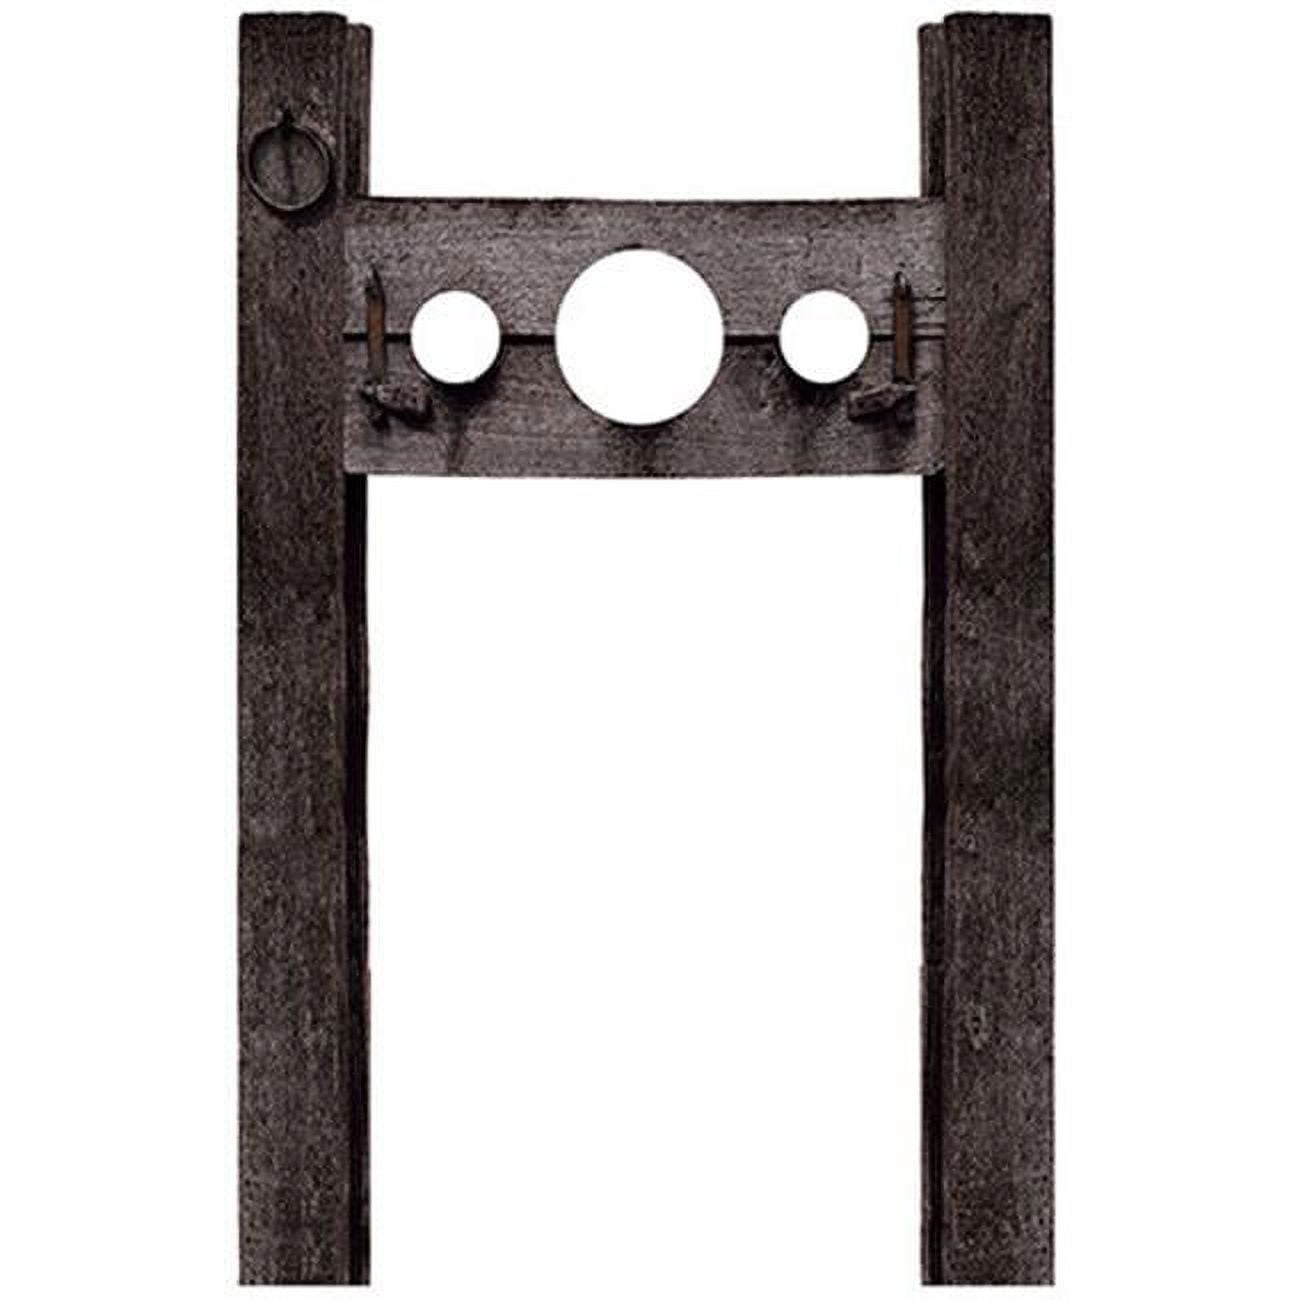 Picture of Advanced Graphics 2519 69 x 44 in. Pillory Post Wall Decal